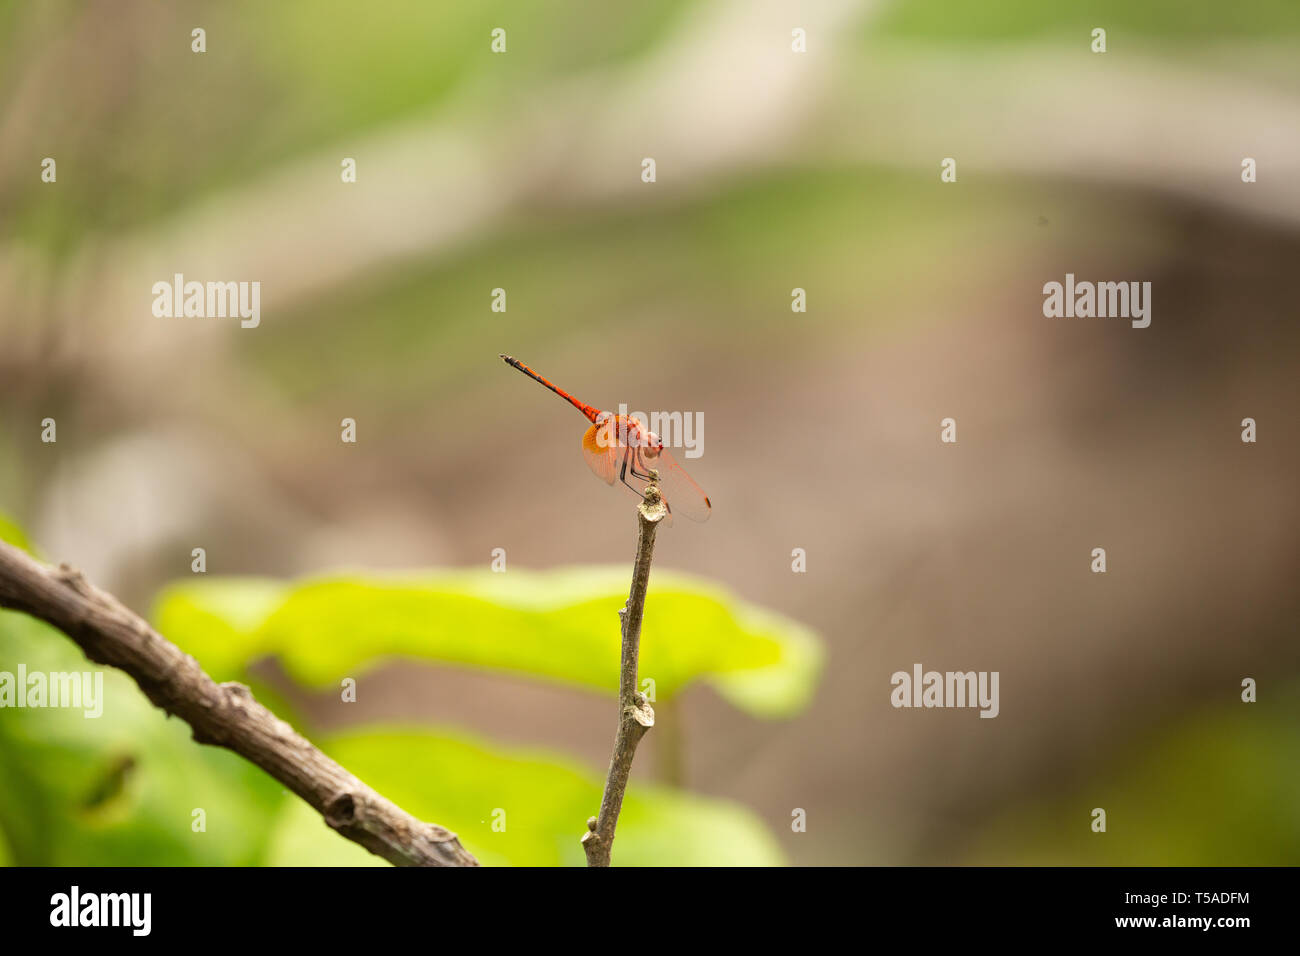 red dragonfly perched on a branch Stock Photo